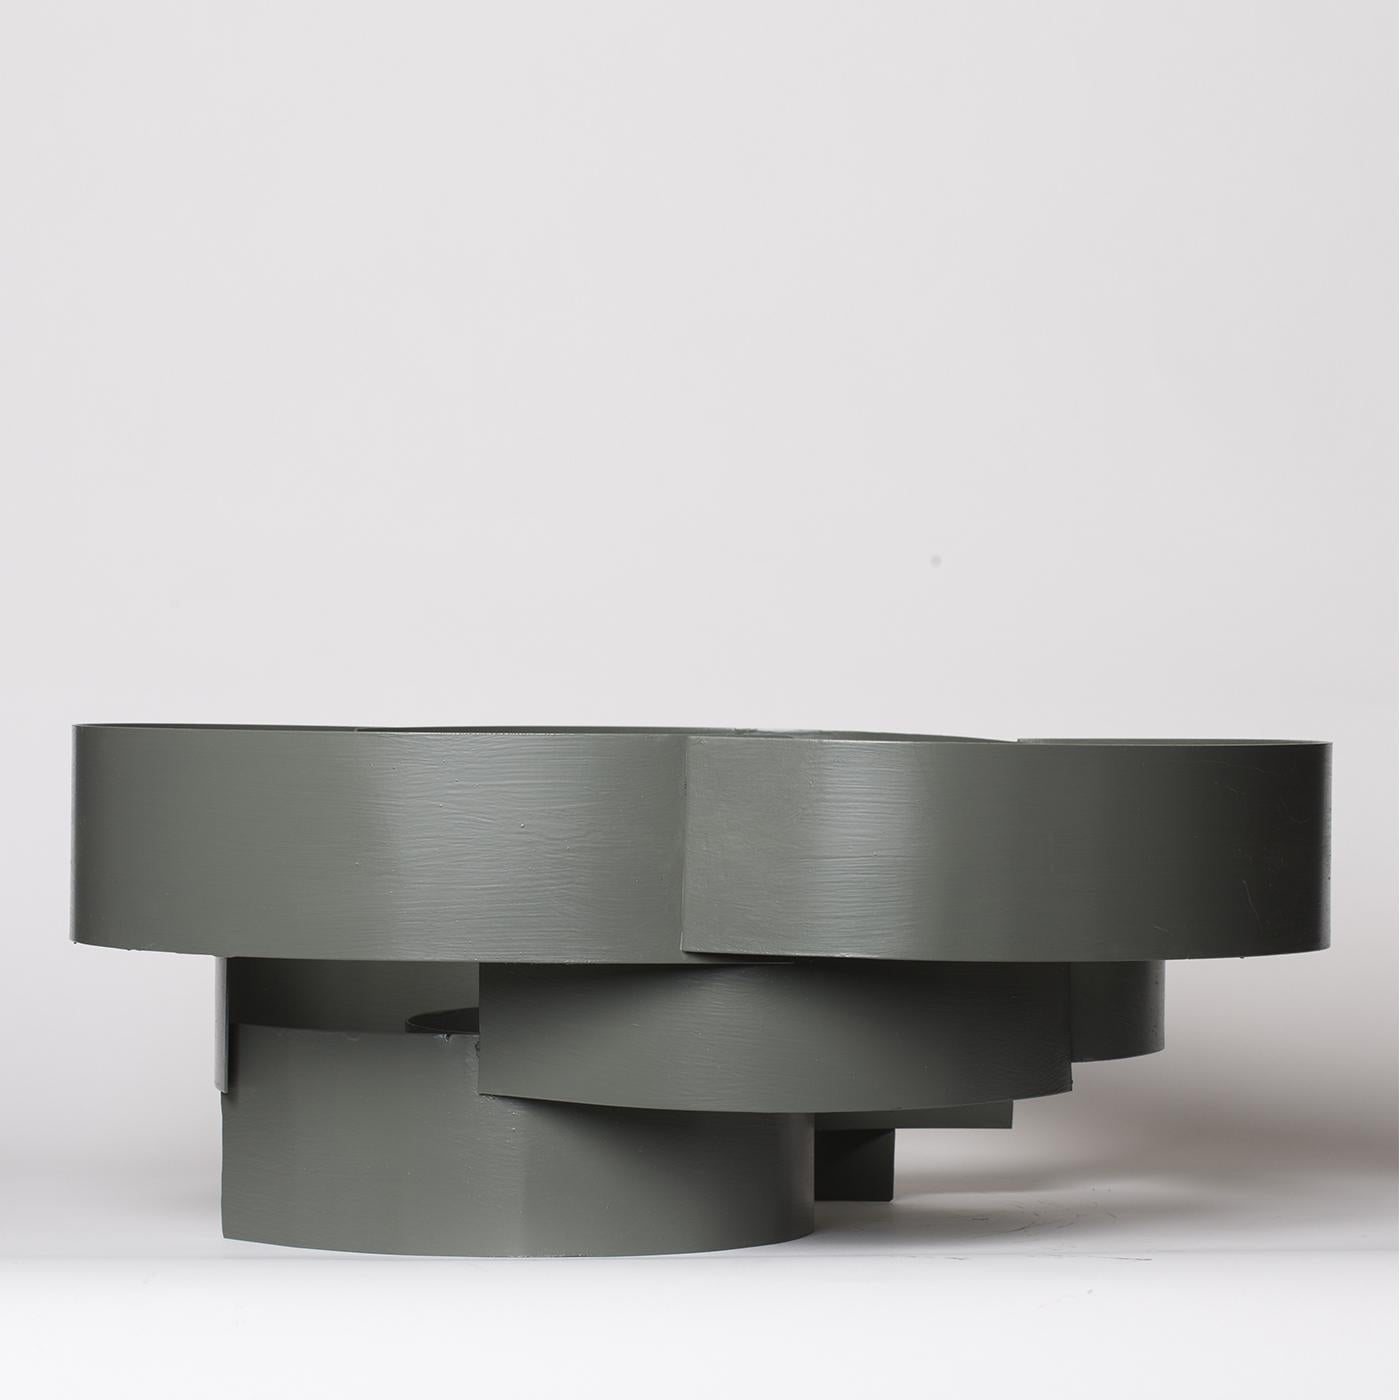 This handmade metal sculptural centerpiece has been polished into a gray-green color. Each piece by Sciortino is a one of a kind piece, entailing that slight variations in size, shape, and color are possible and are part of the artistic value of